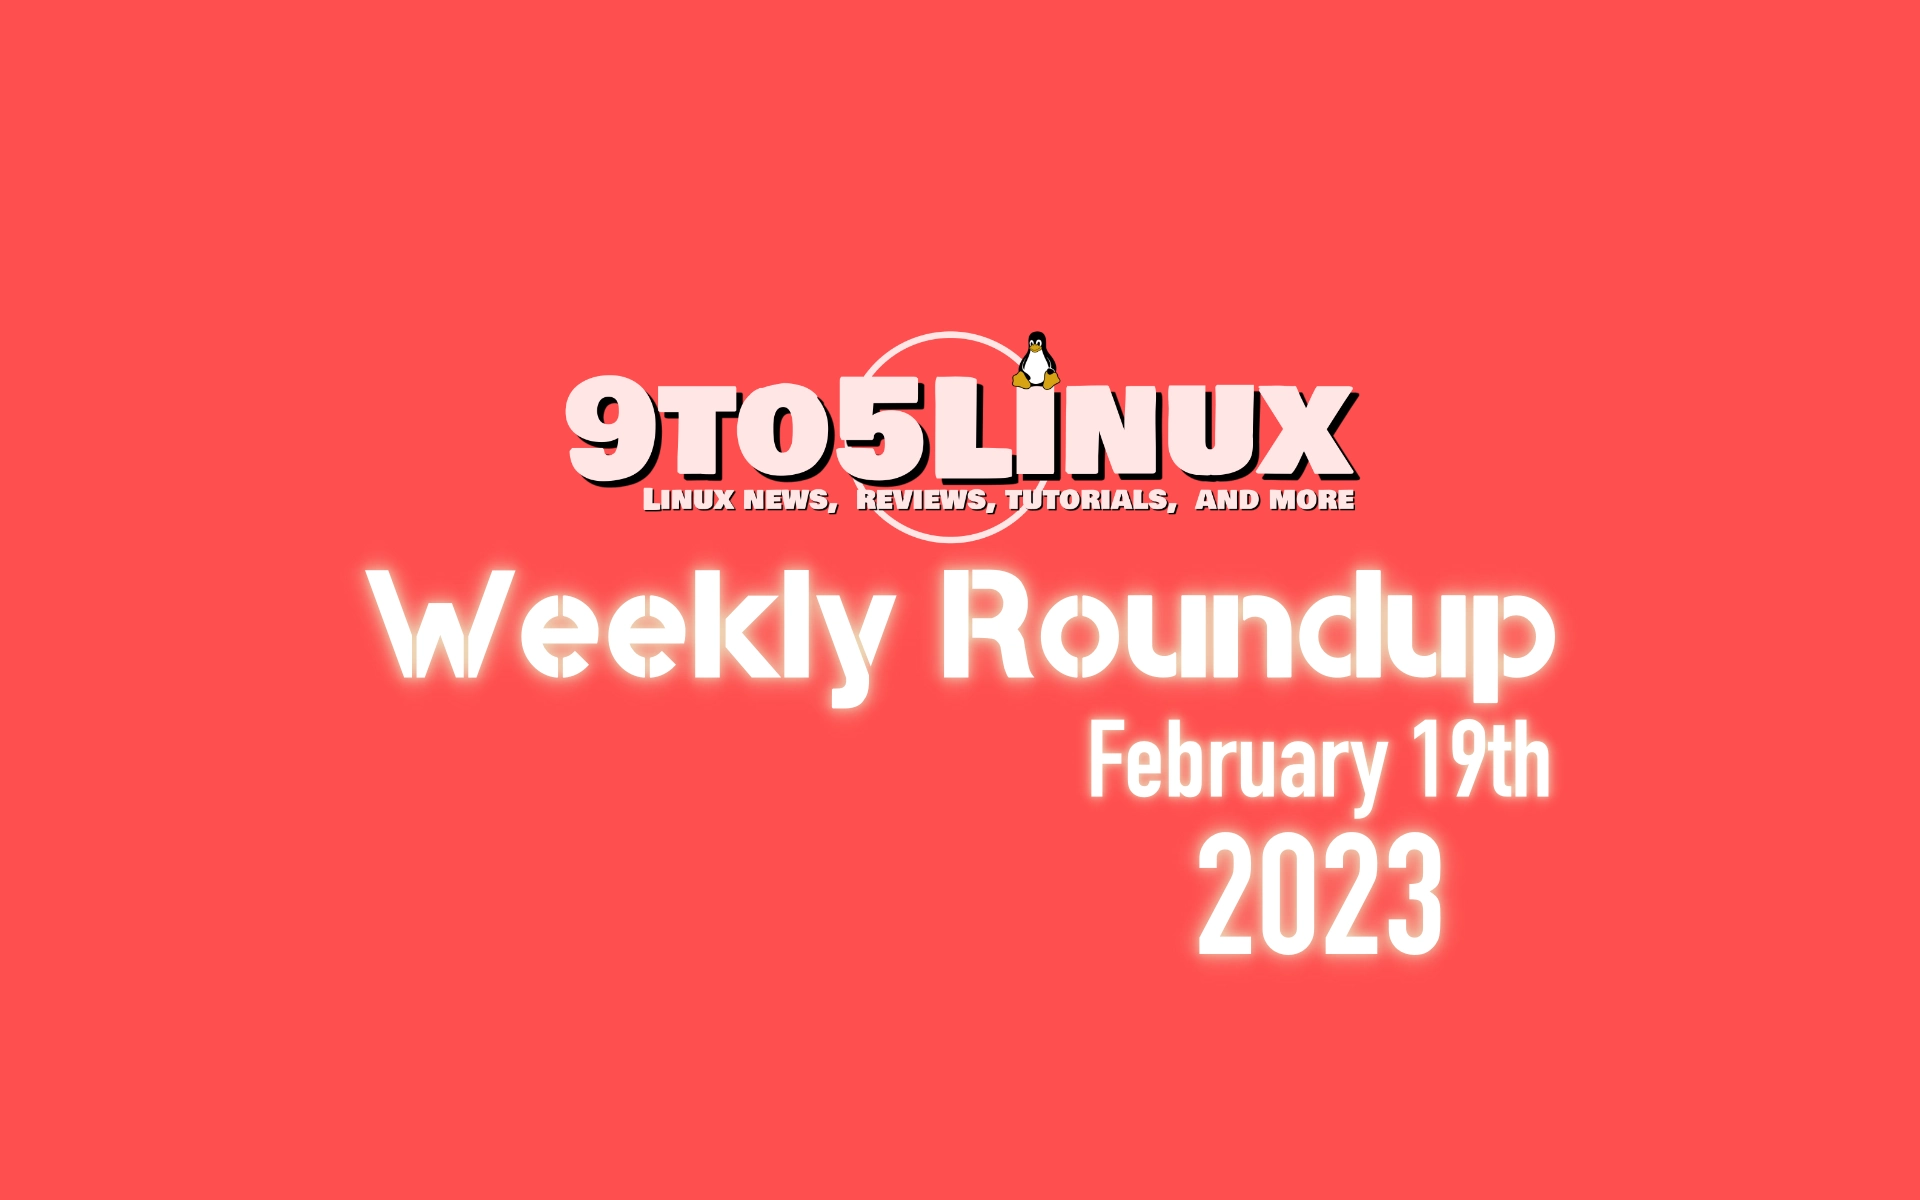 9to5Linux Weekly Roundup: February 19th, 2023